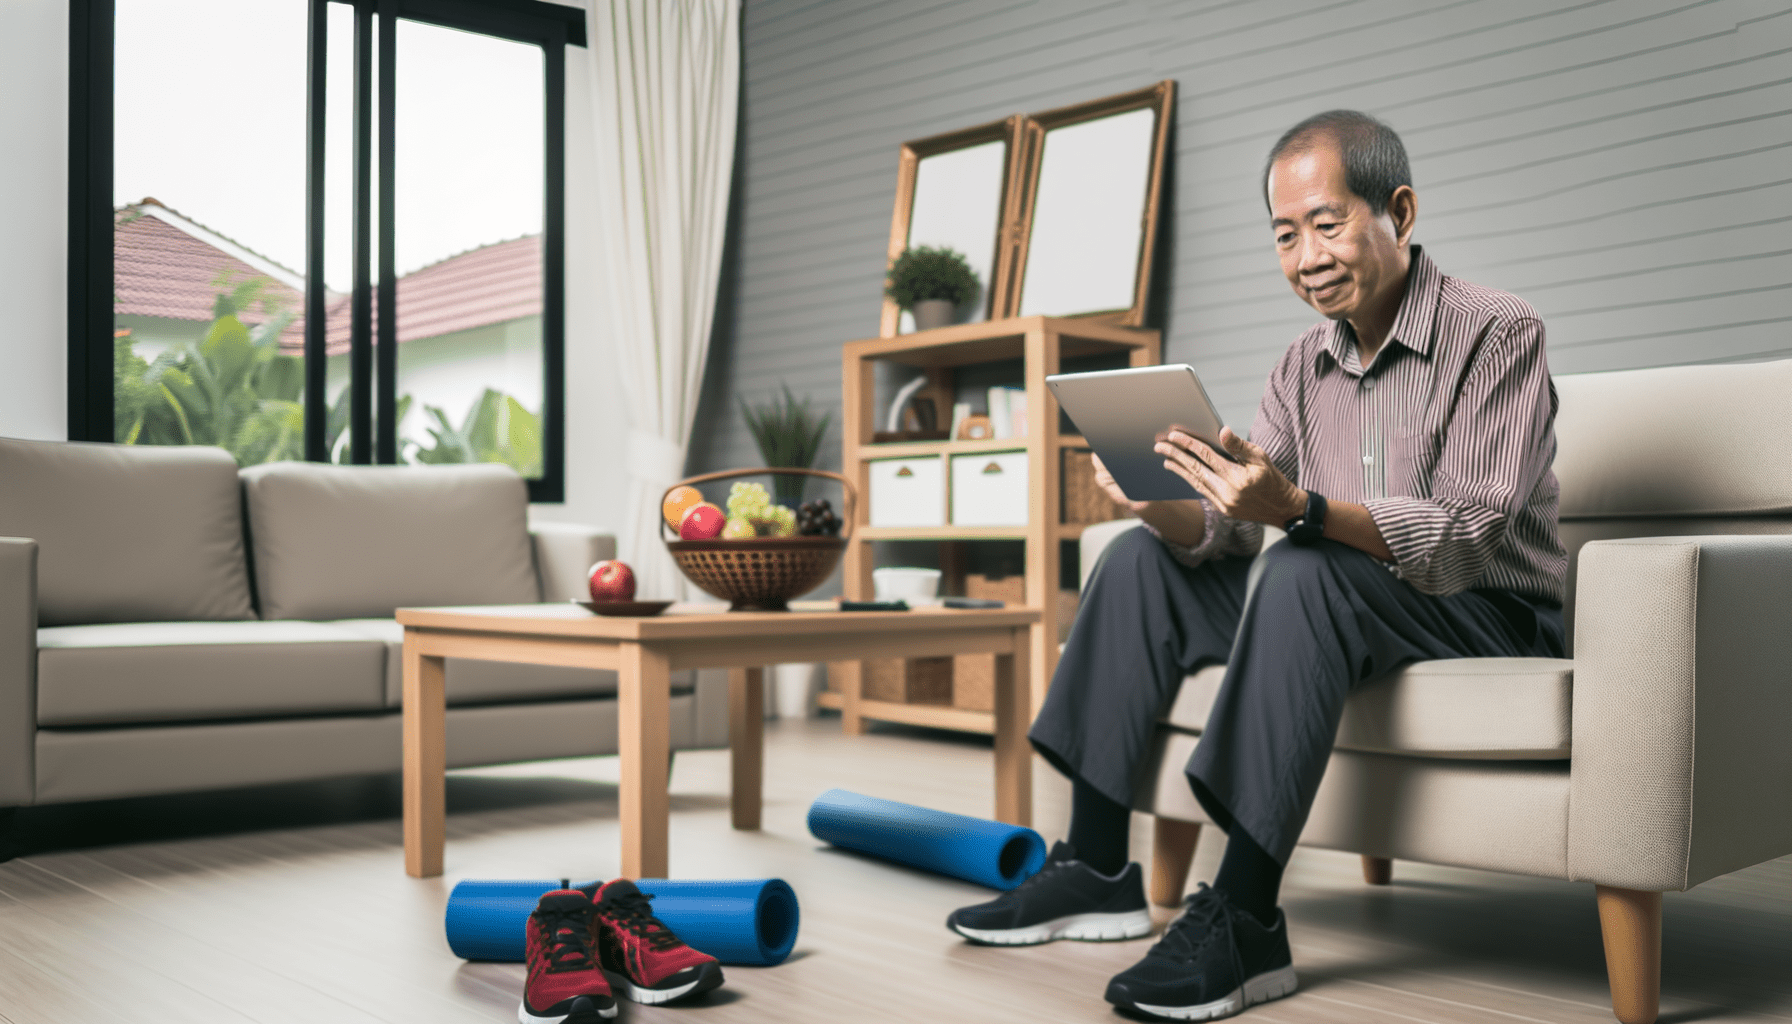 Senior-Friendly Apps to Keep Your Mind and Body Sharp